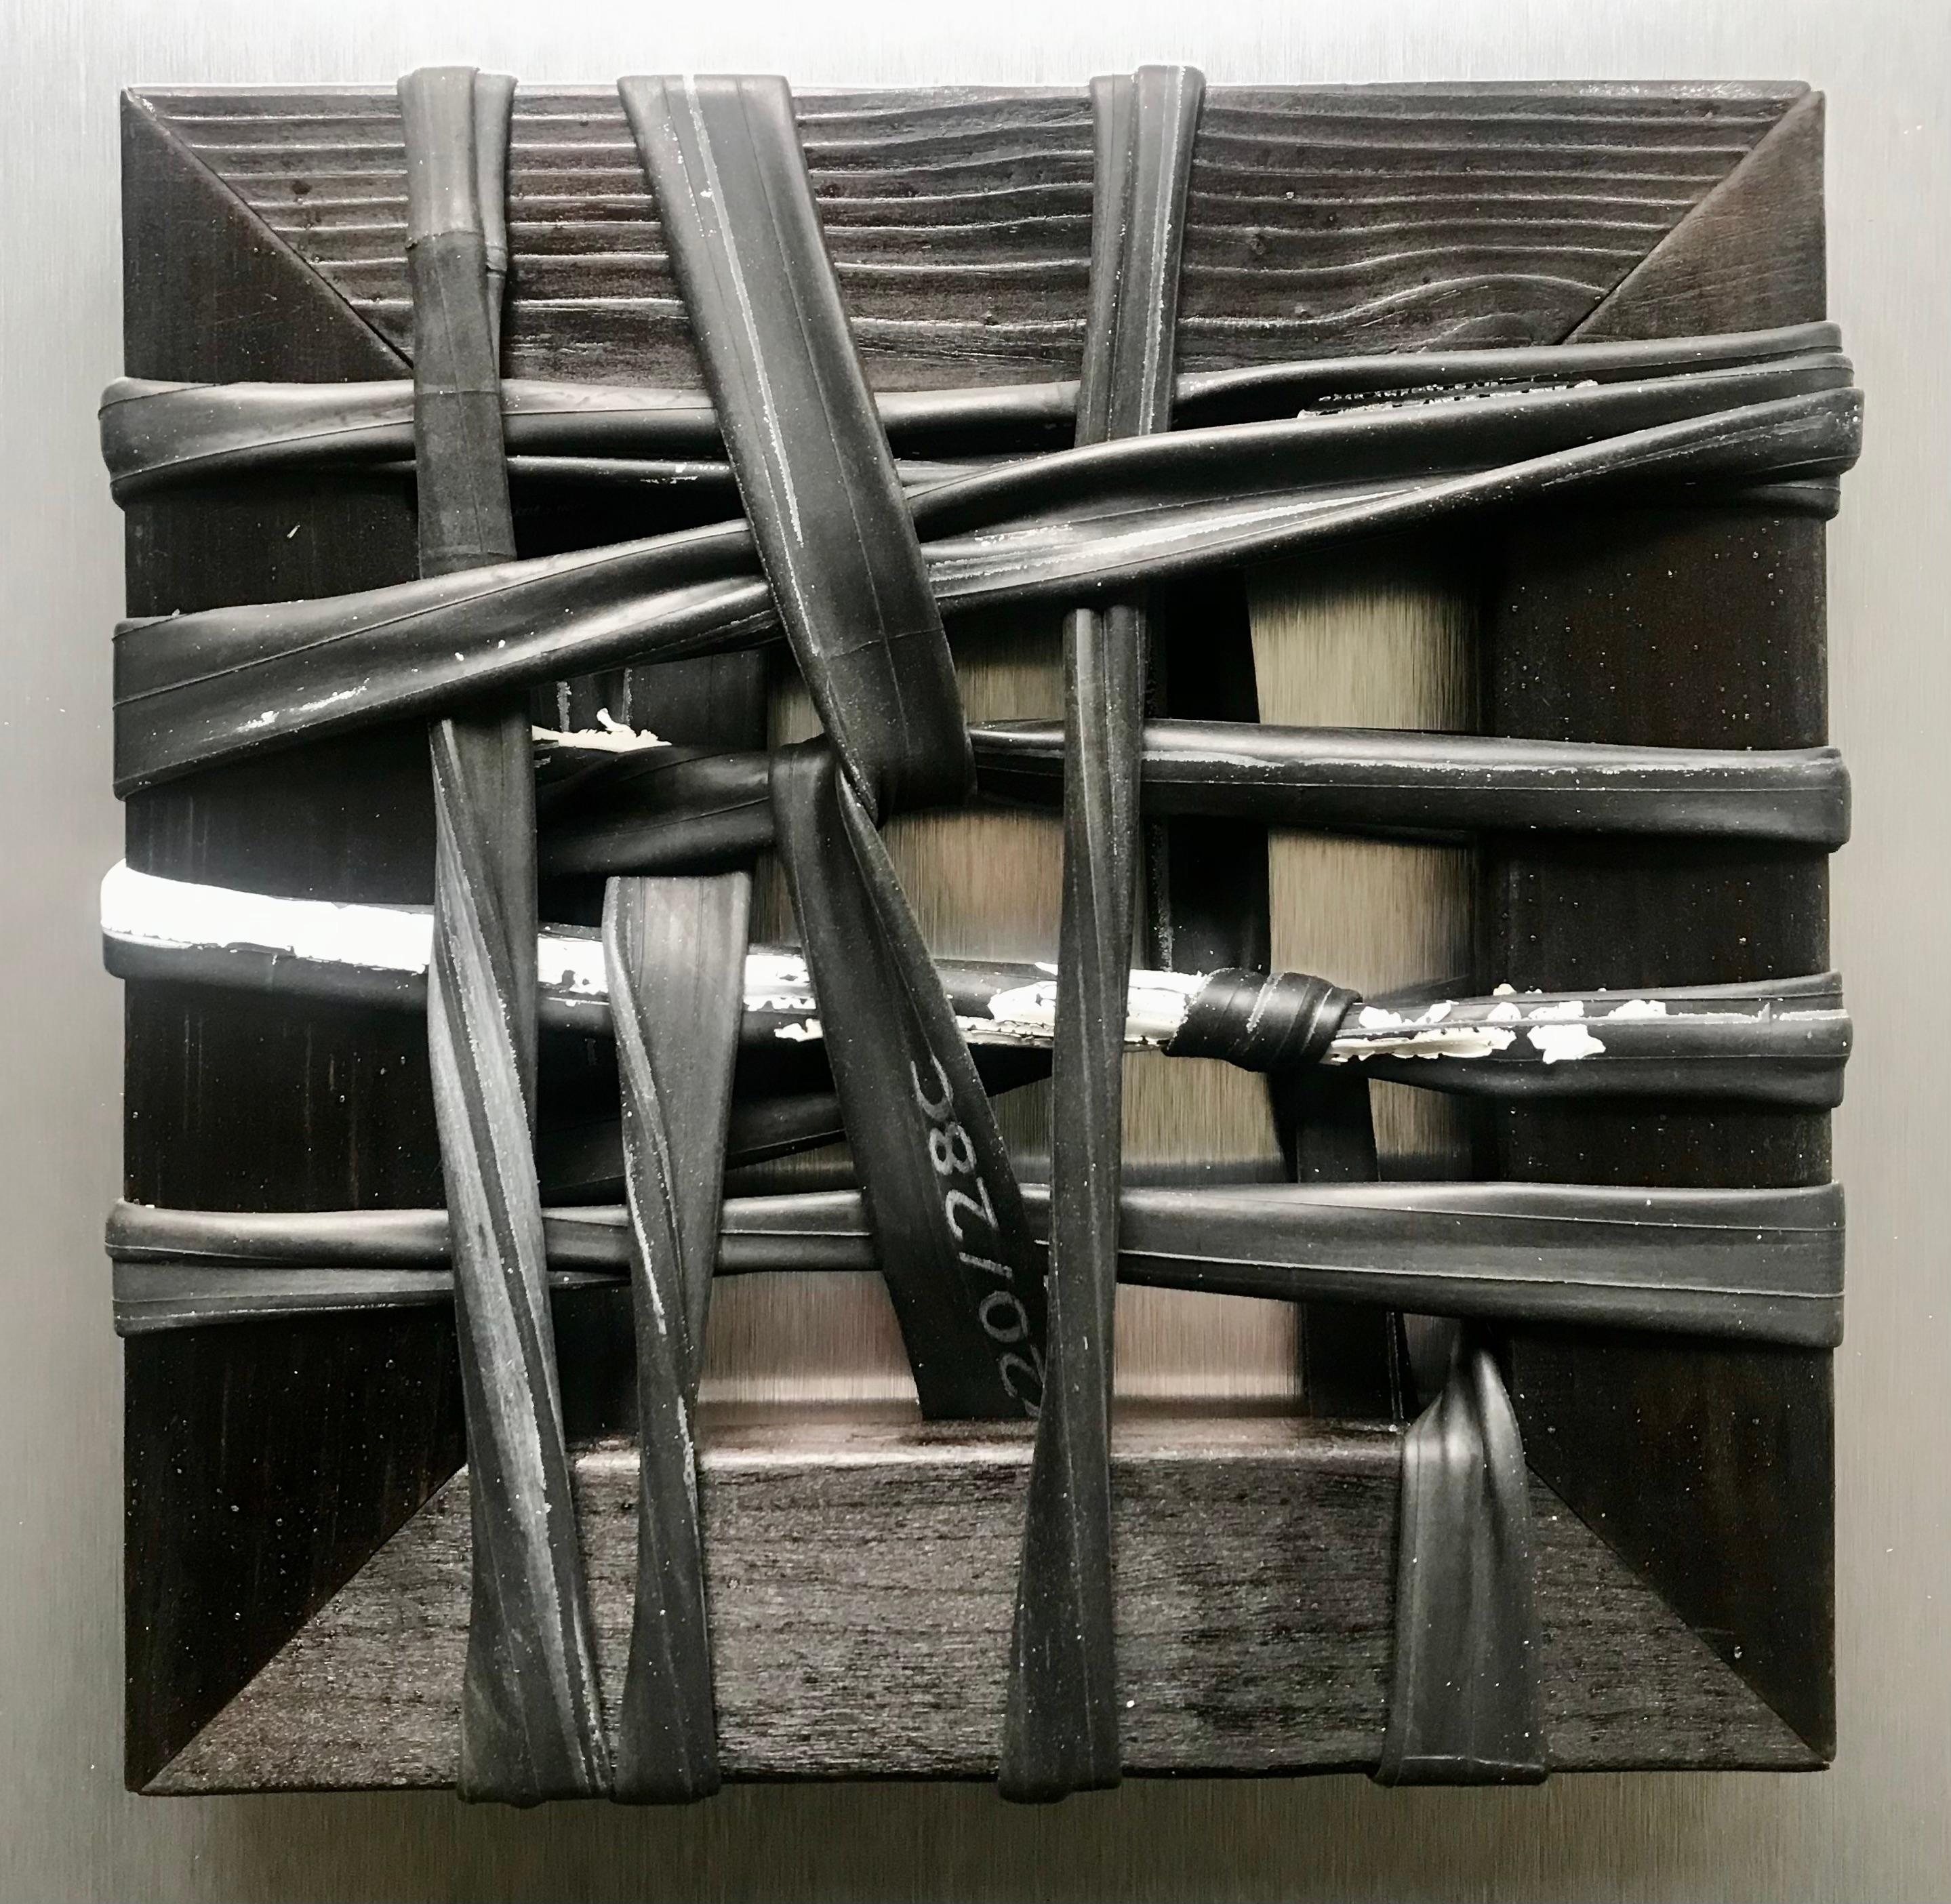 "Clue #4", abstract sculpture, wood, paint, rubber tubes, found objects